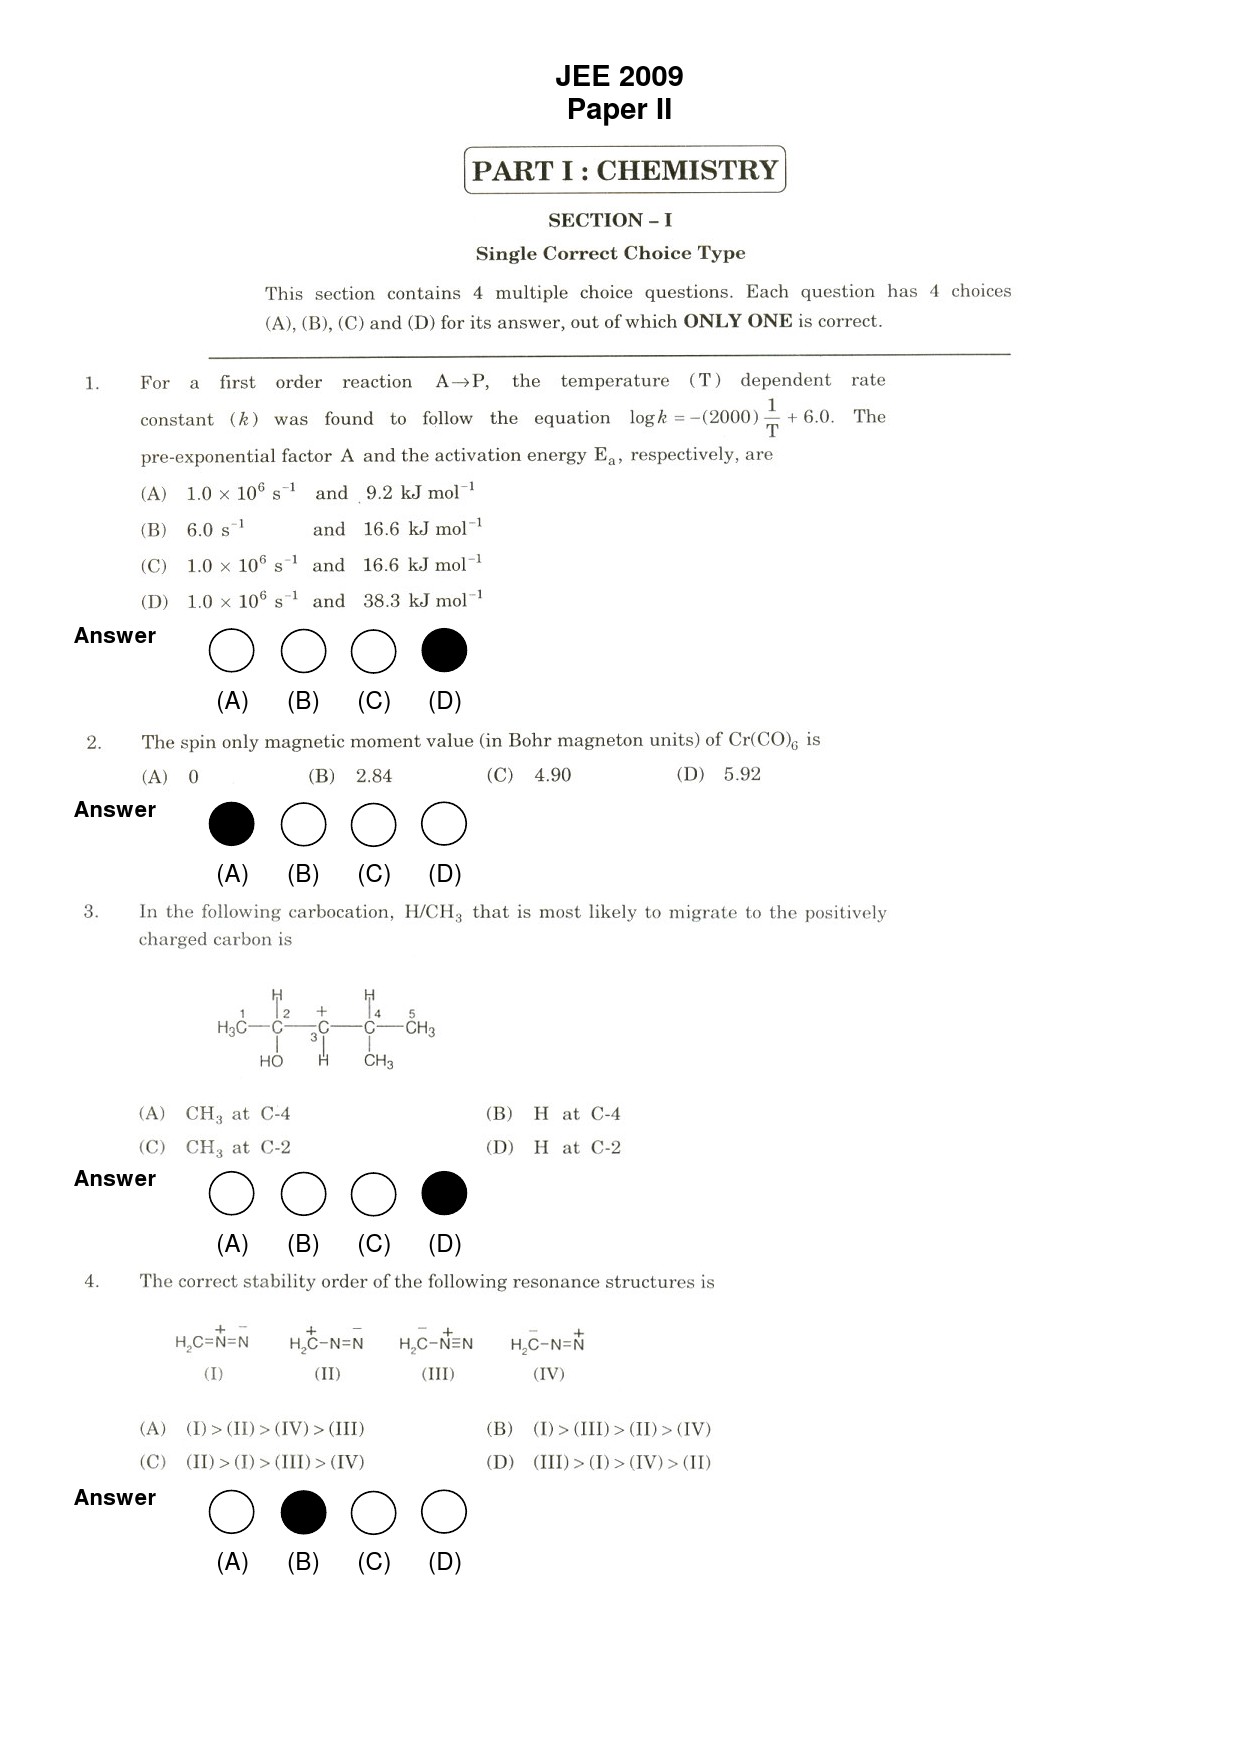 JEE Exam Question Paper 2009 Paper 2 1